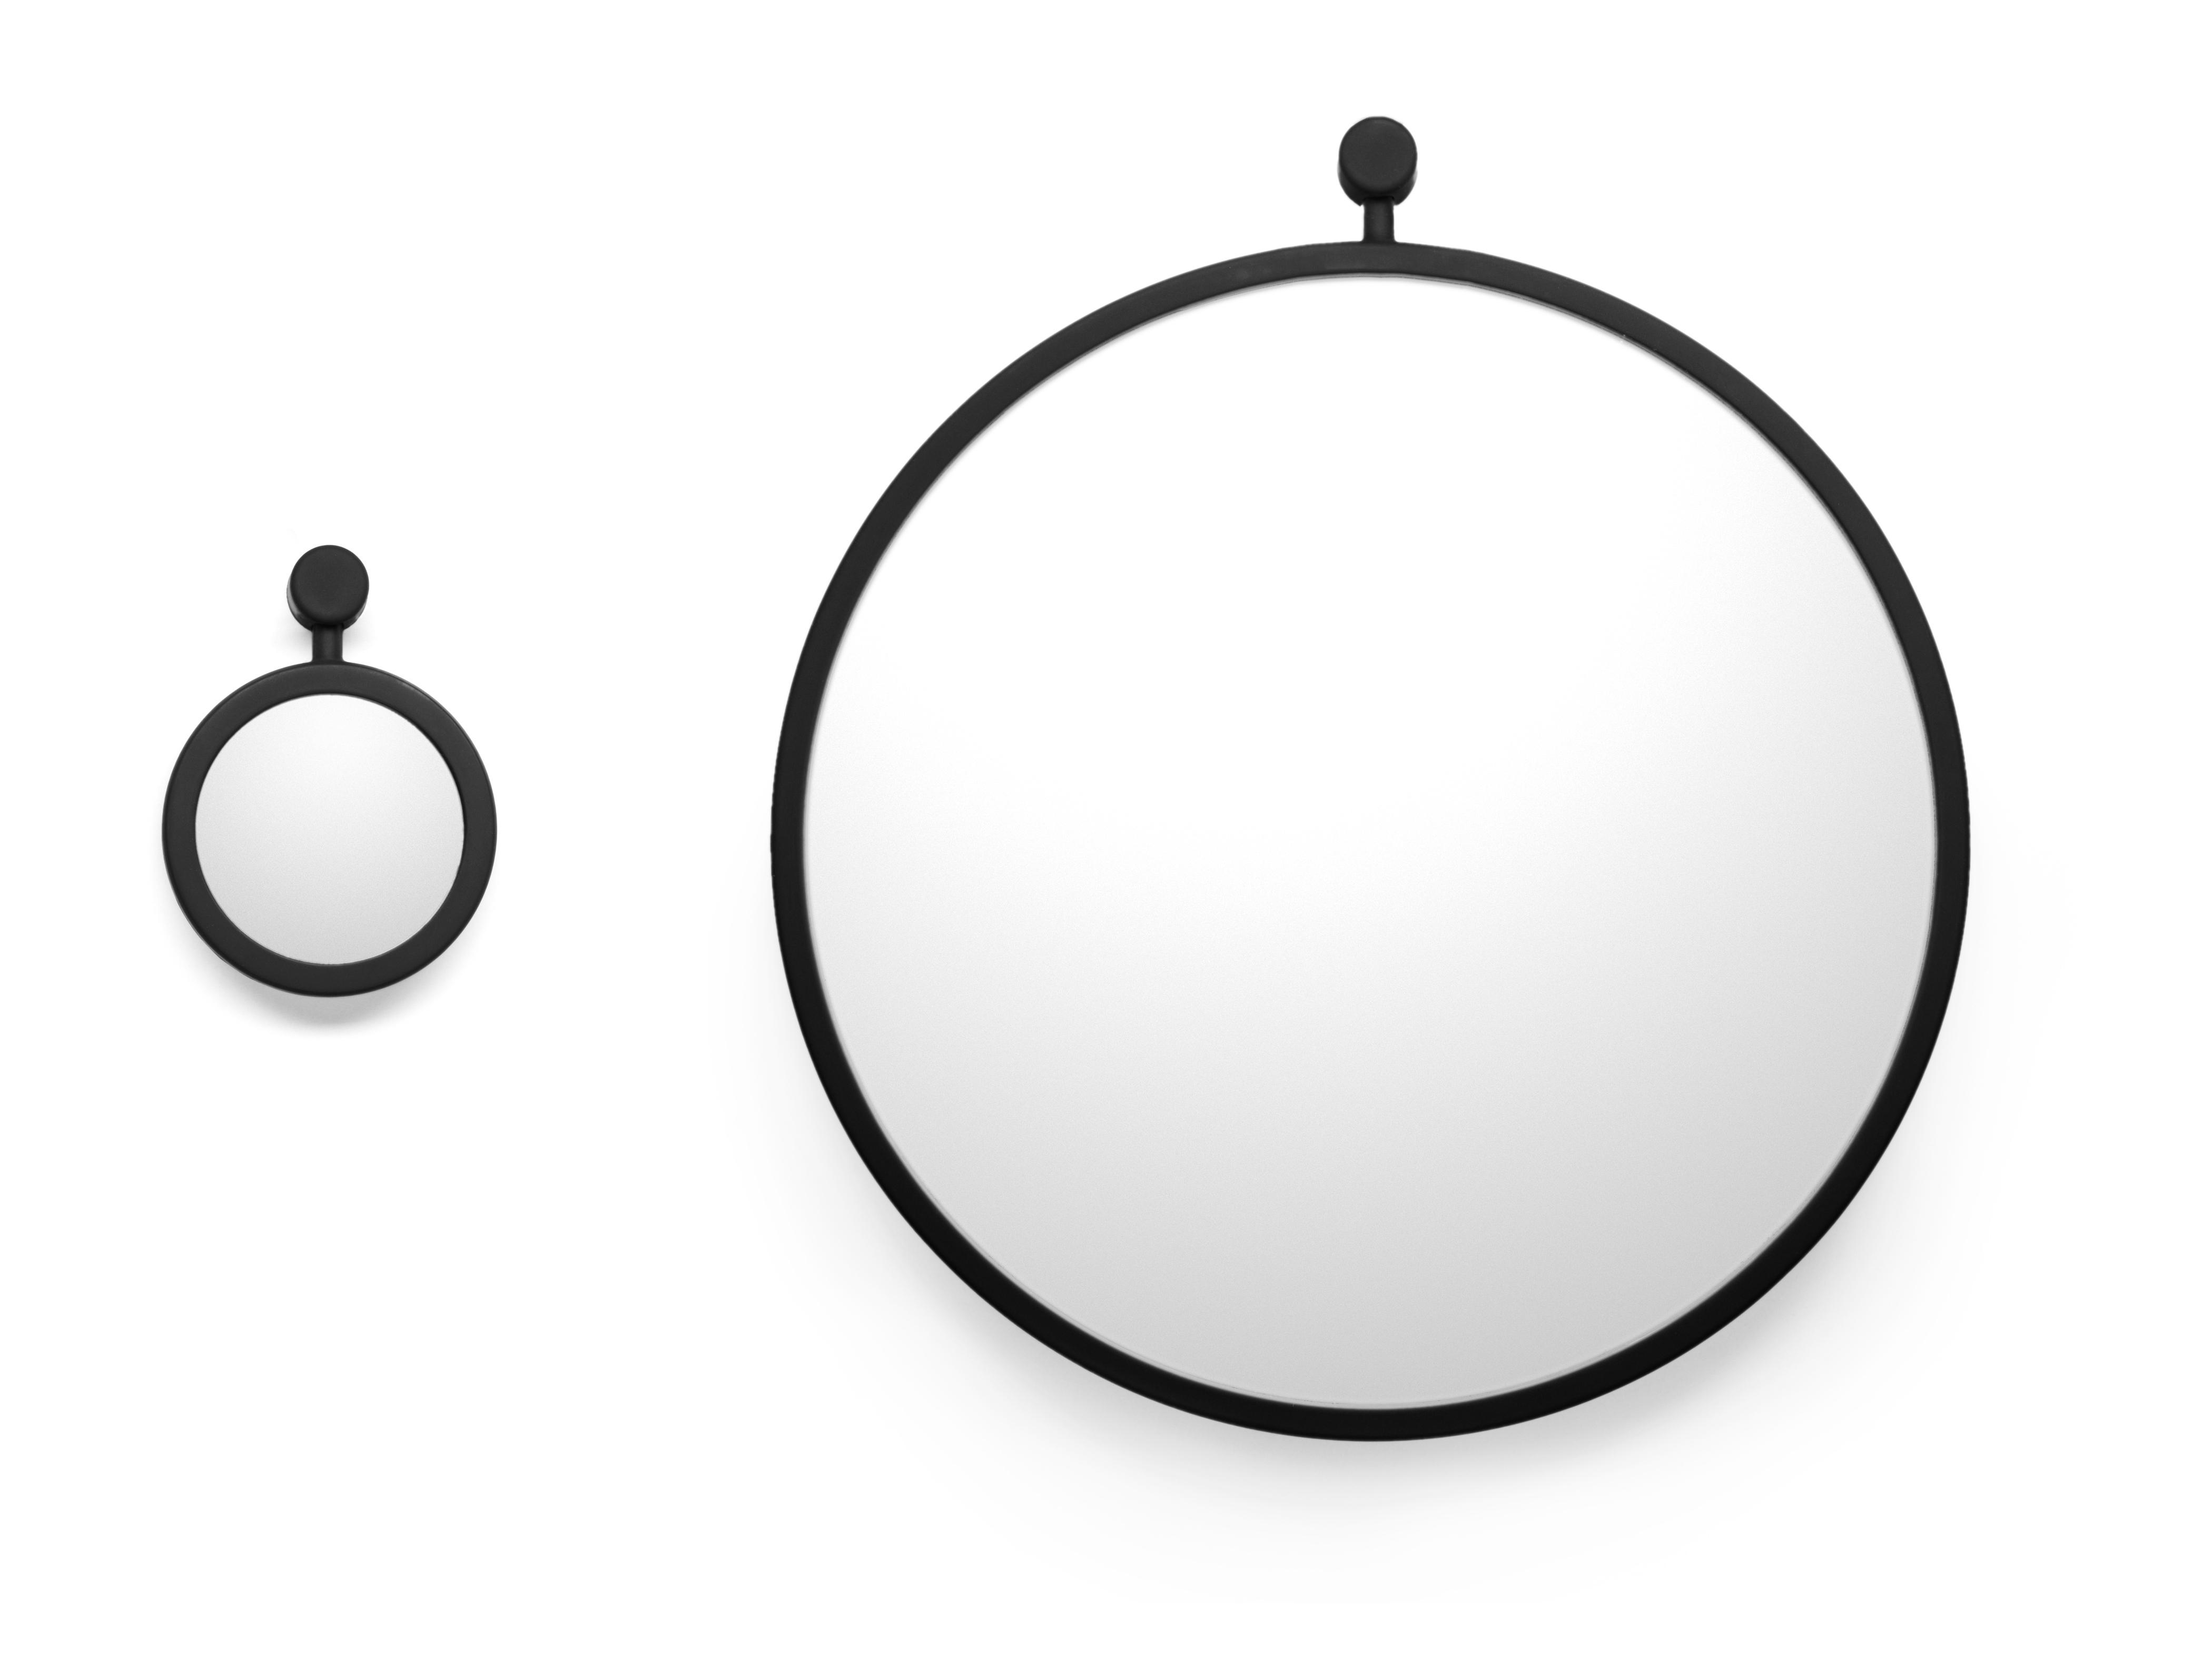 Two side-by-side circular mirrors with black borders.